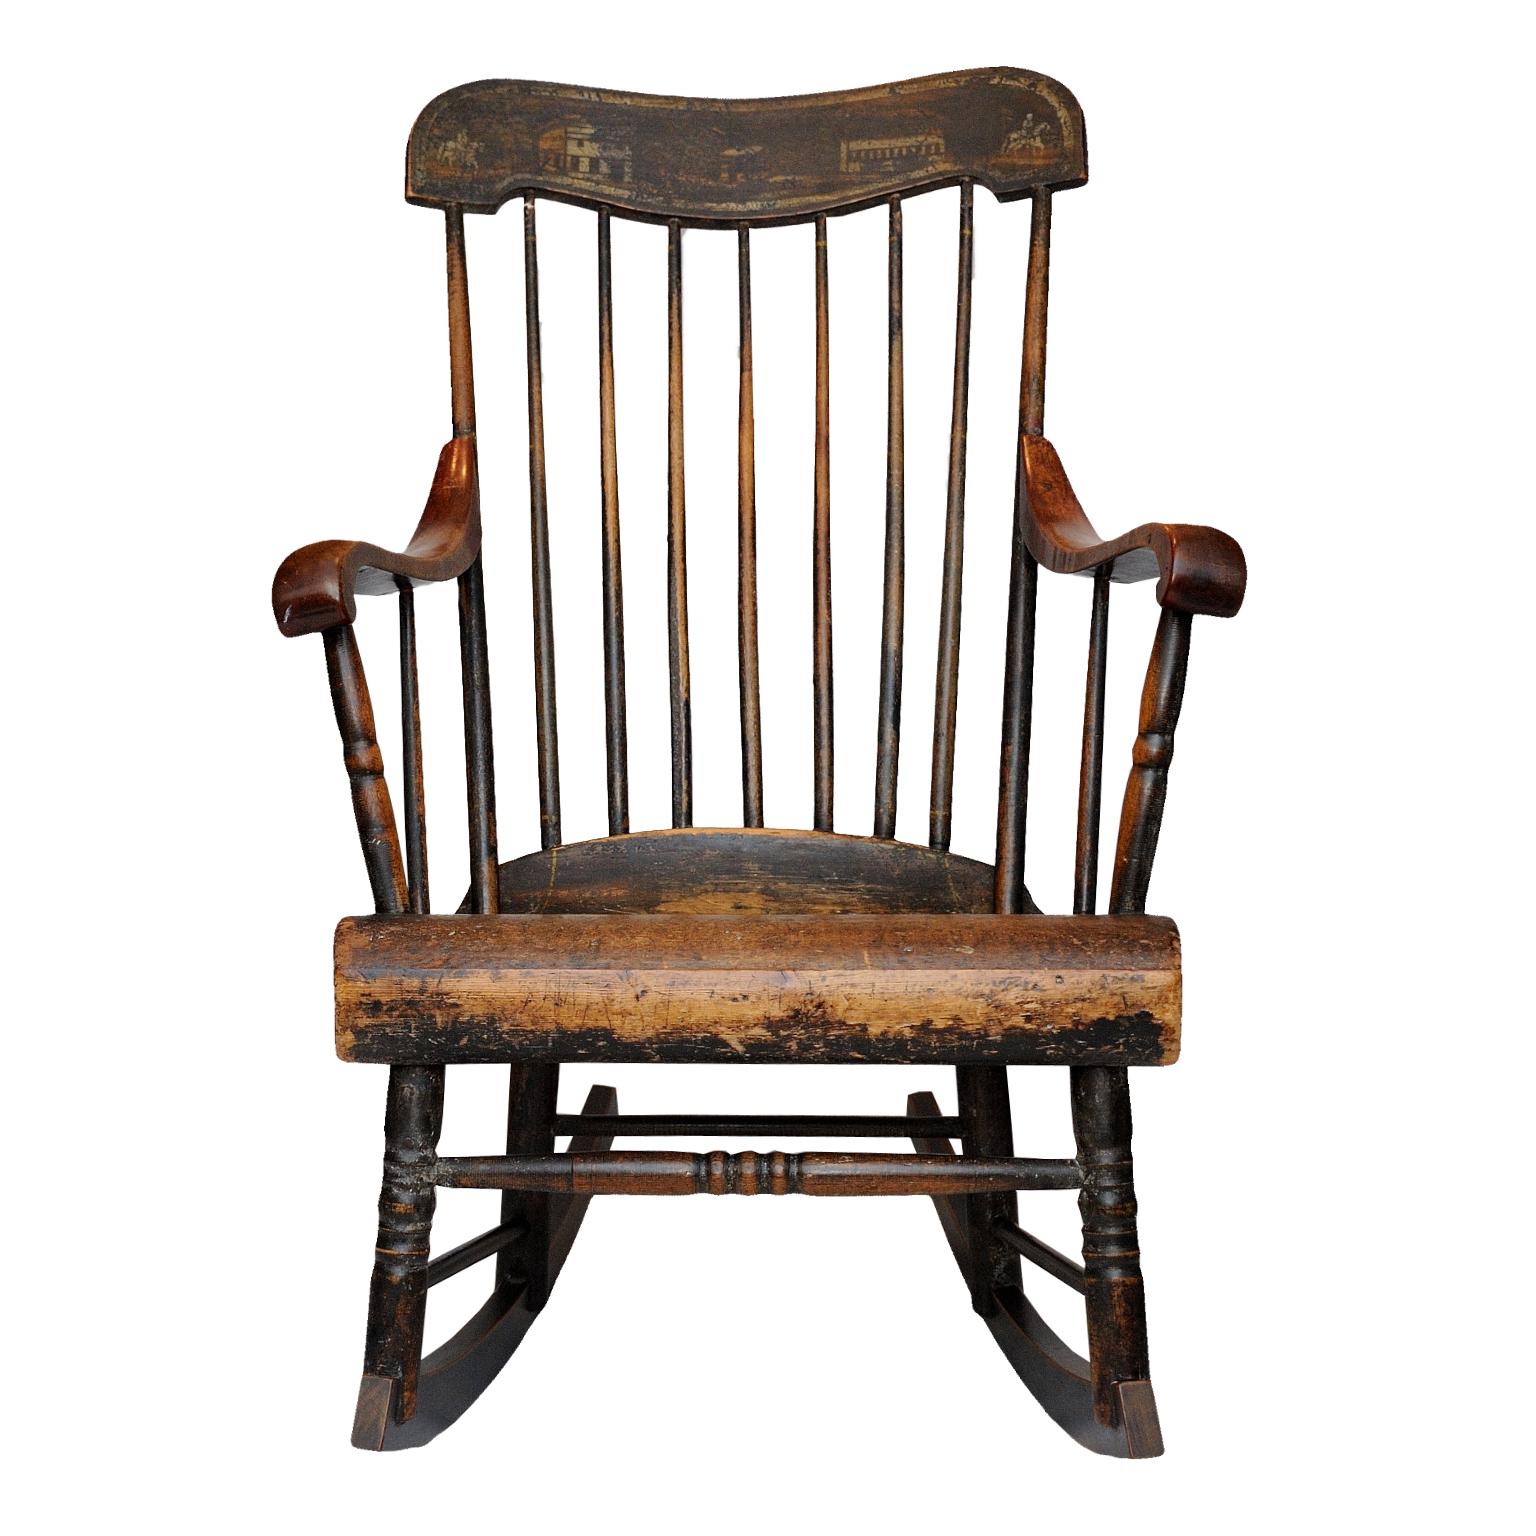 This is a lovely example of a Classic American mid-19th century Boston rocker, retaining its original paintwork (in untouched condition), circa 1840. A wonderful piece of Americana.
Also included, framed original album cover of Louis Armstrong